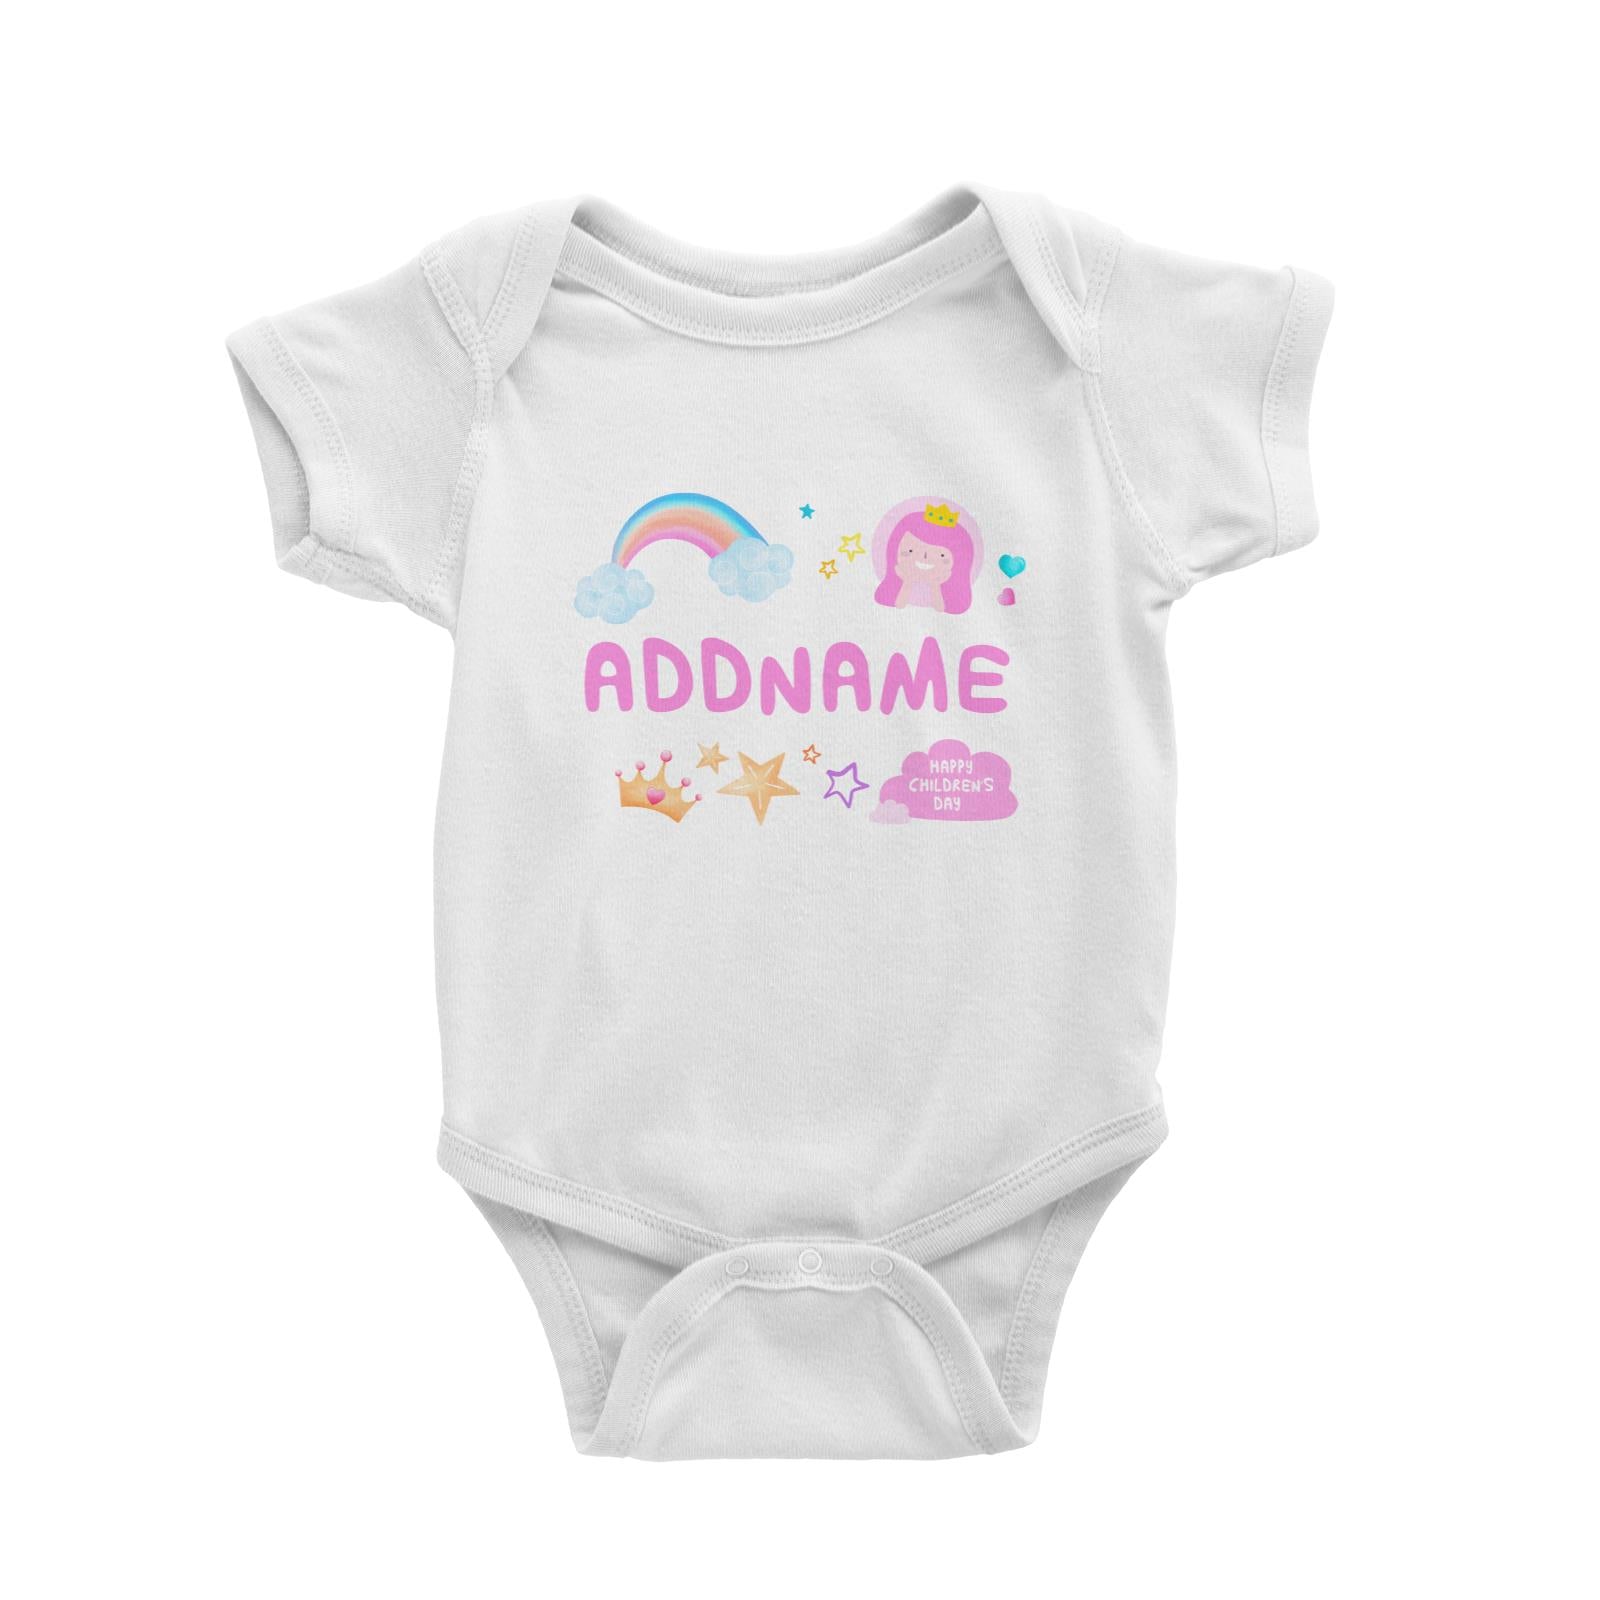 Children's Day Gift Series Cute Pink Girl Princess Rainbow Addname Baby Romper